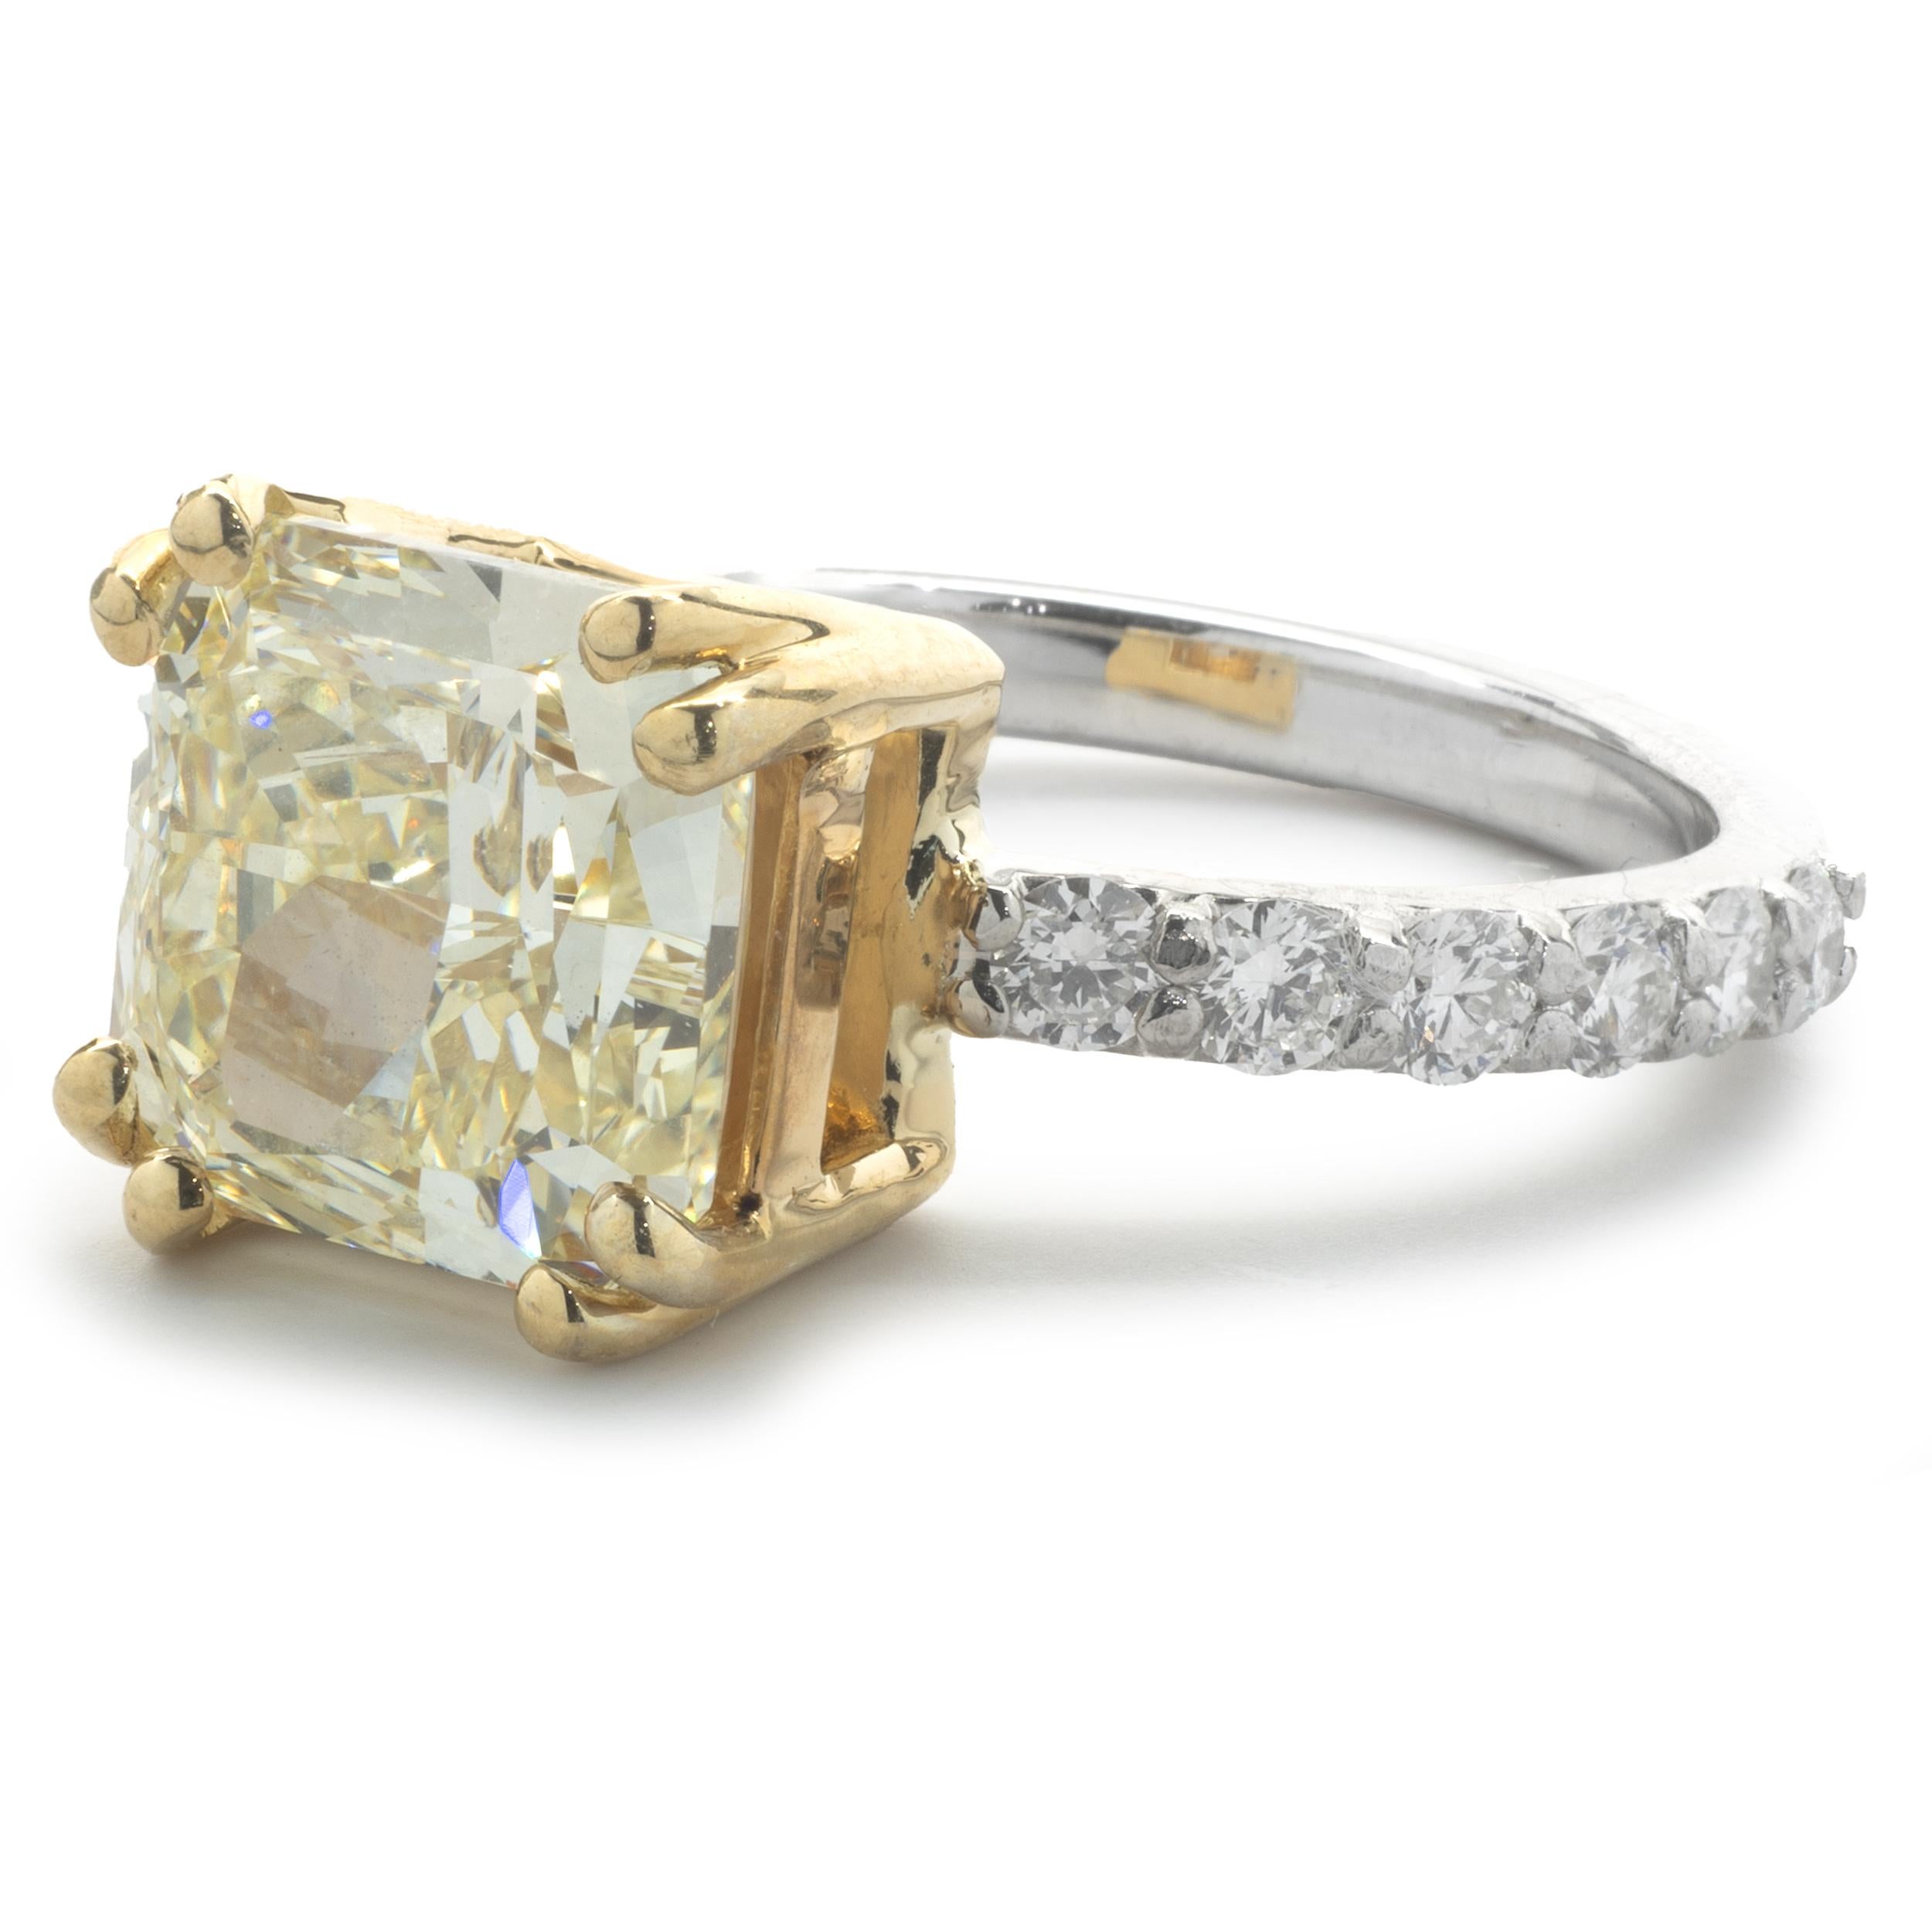 14 Karat White and Yellow Gold Fancy Yellow Cushion Cut Diamond Engagement Ring In Excellent Condition For Sale In Scottsdale, AZ